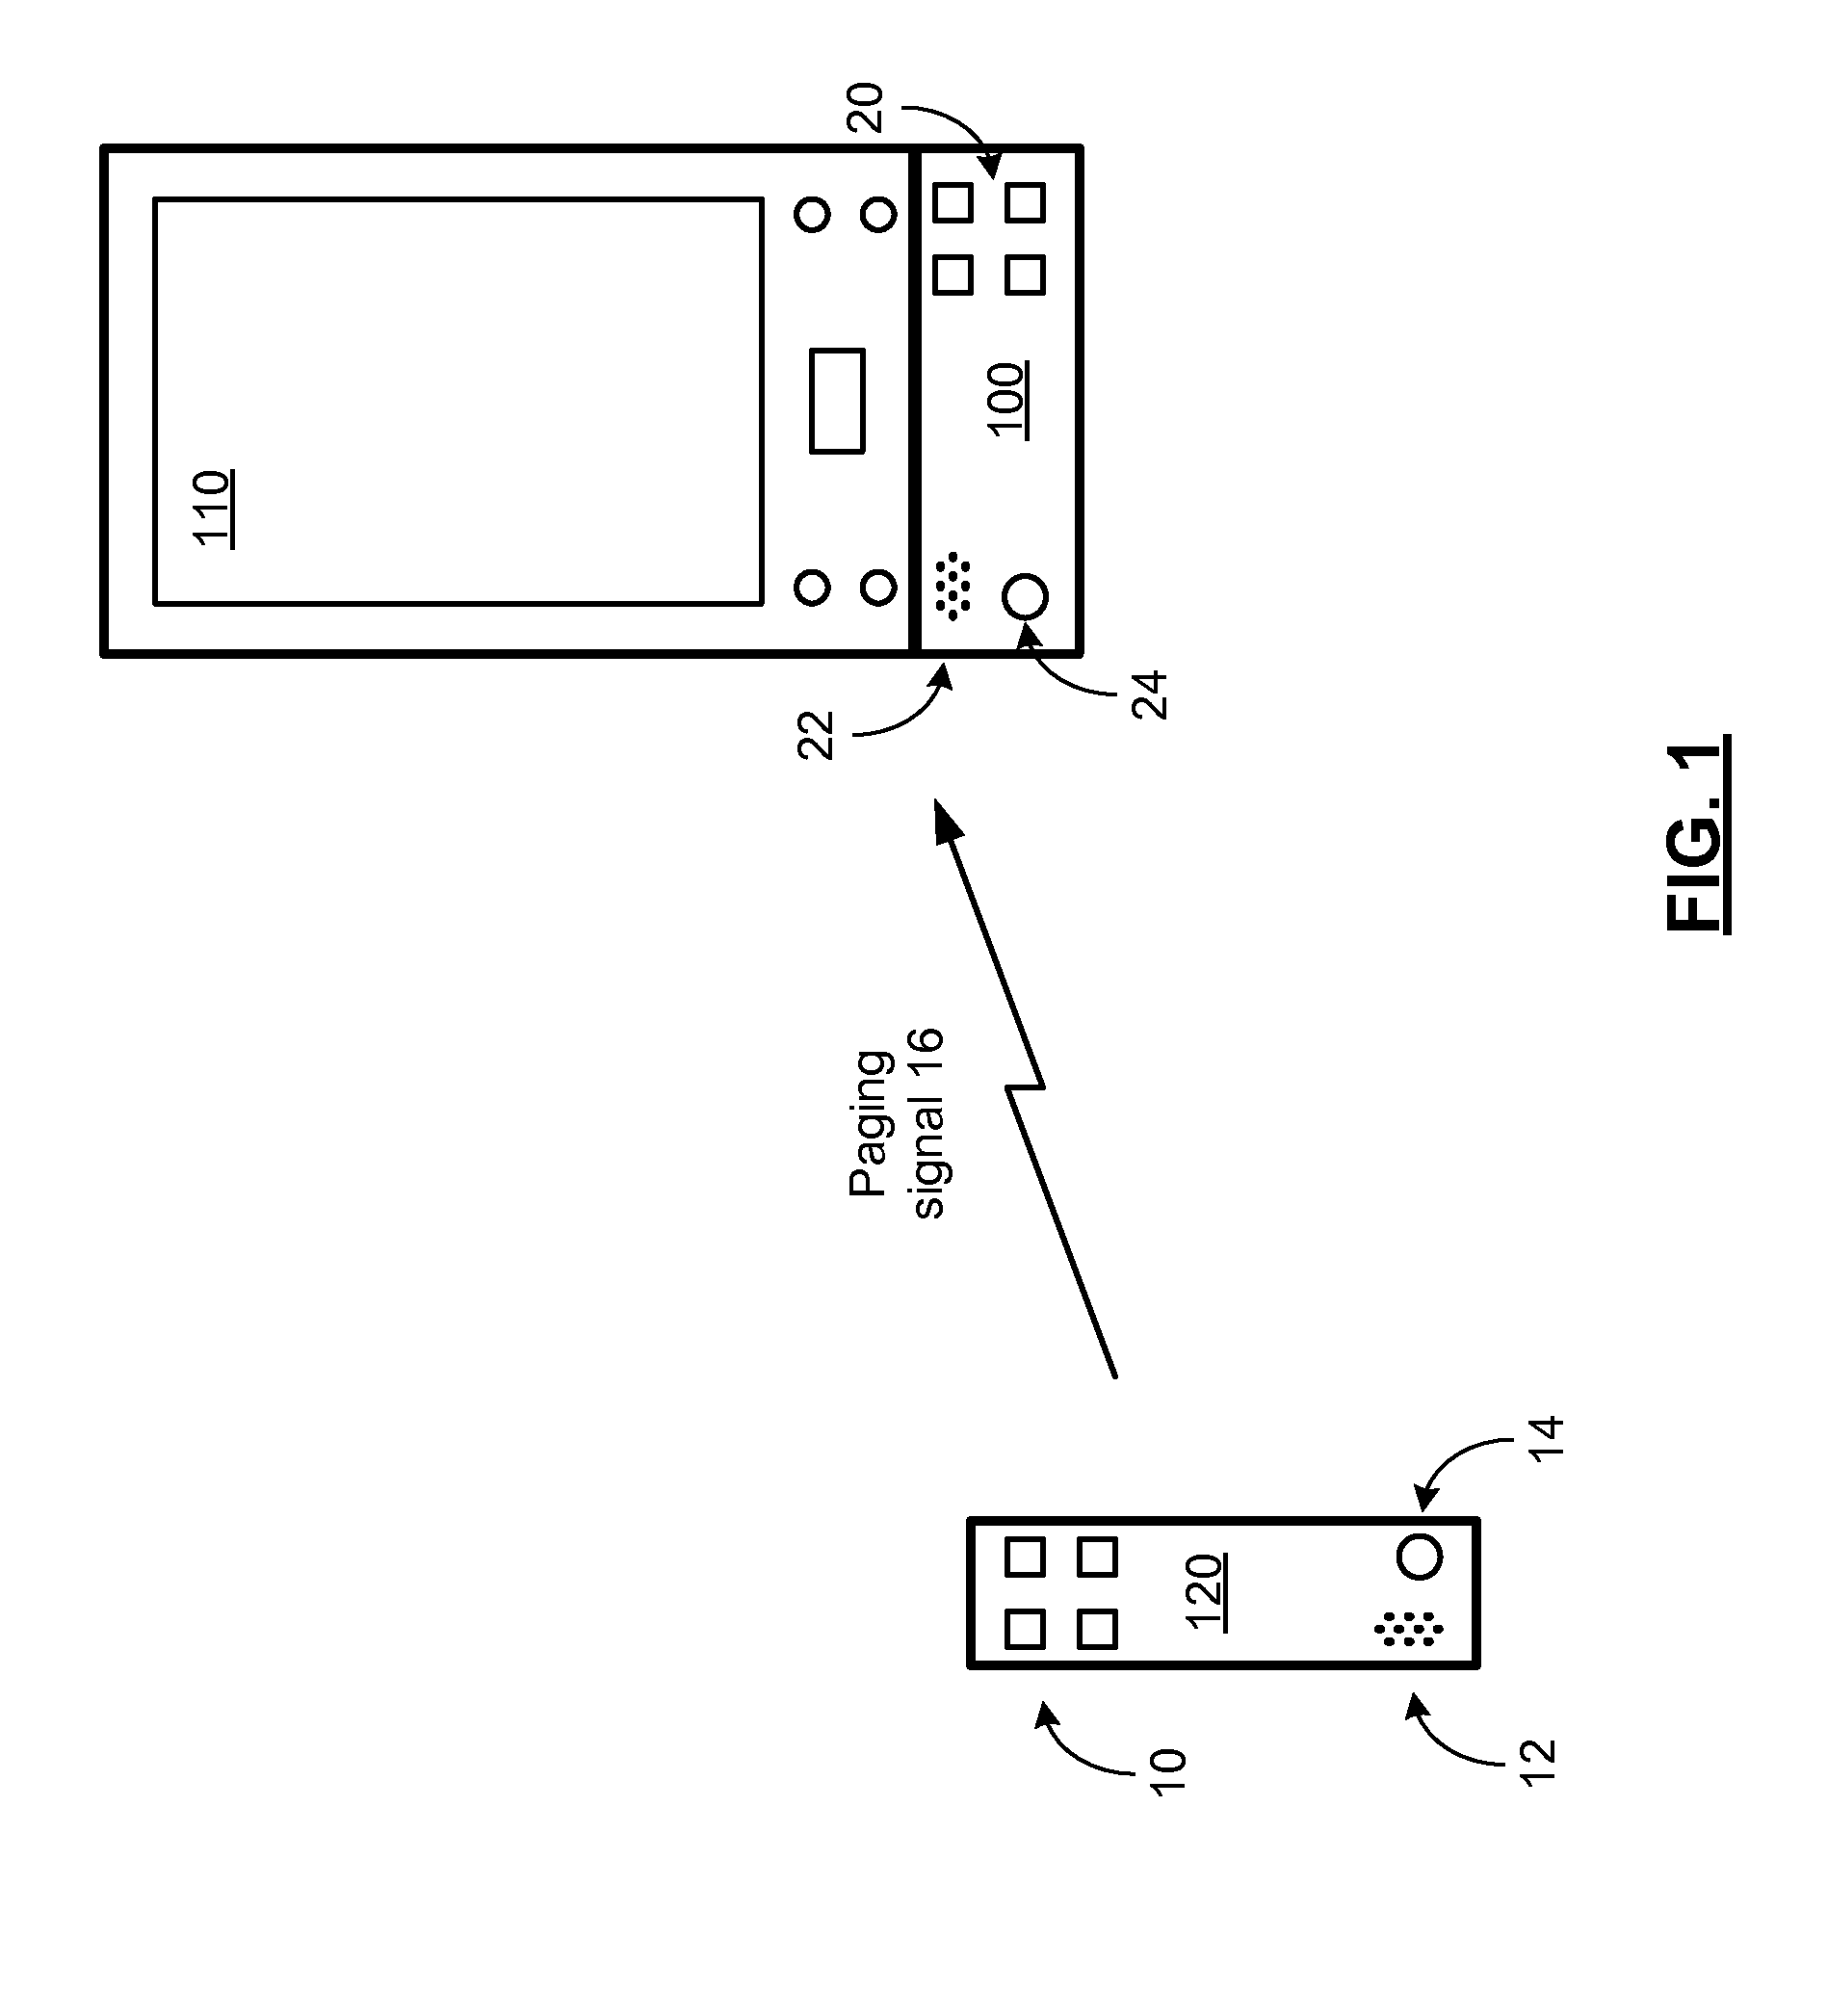 Adjunct device for use with a handheld wireless communication device as a screen pointer